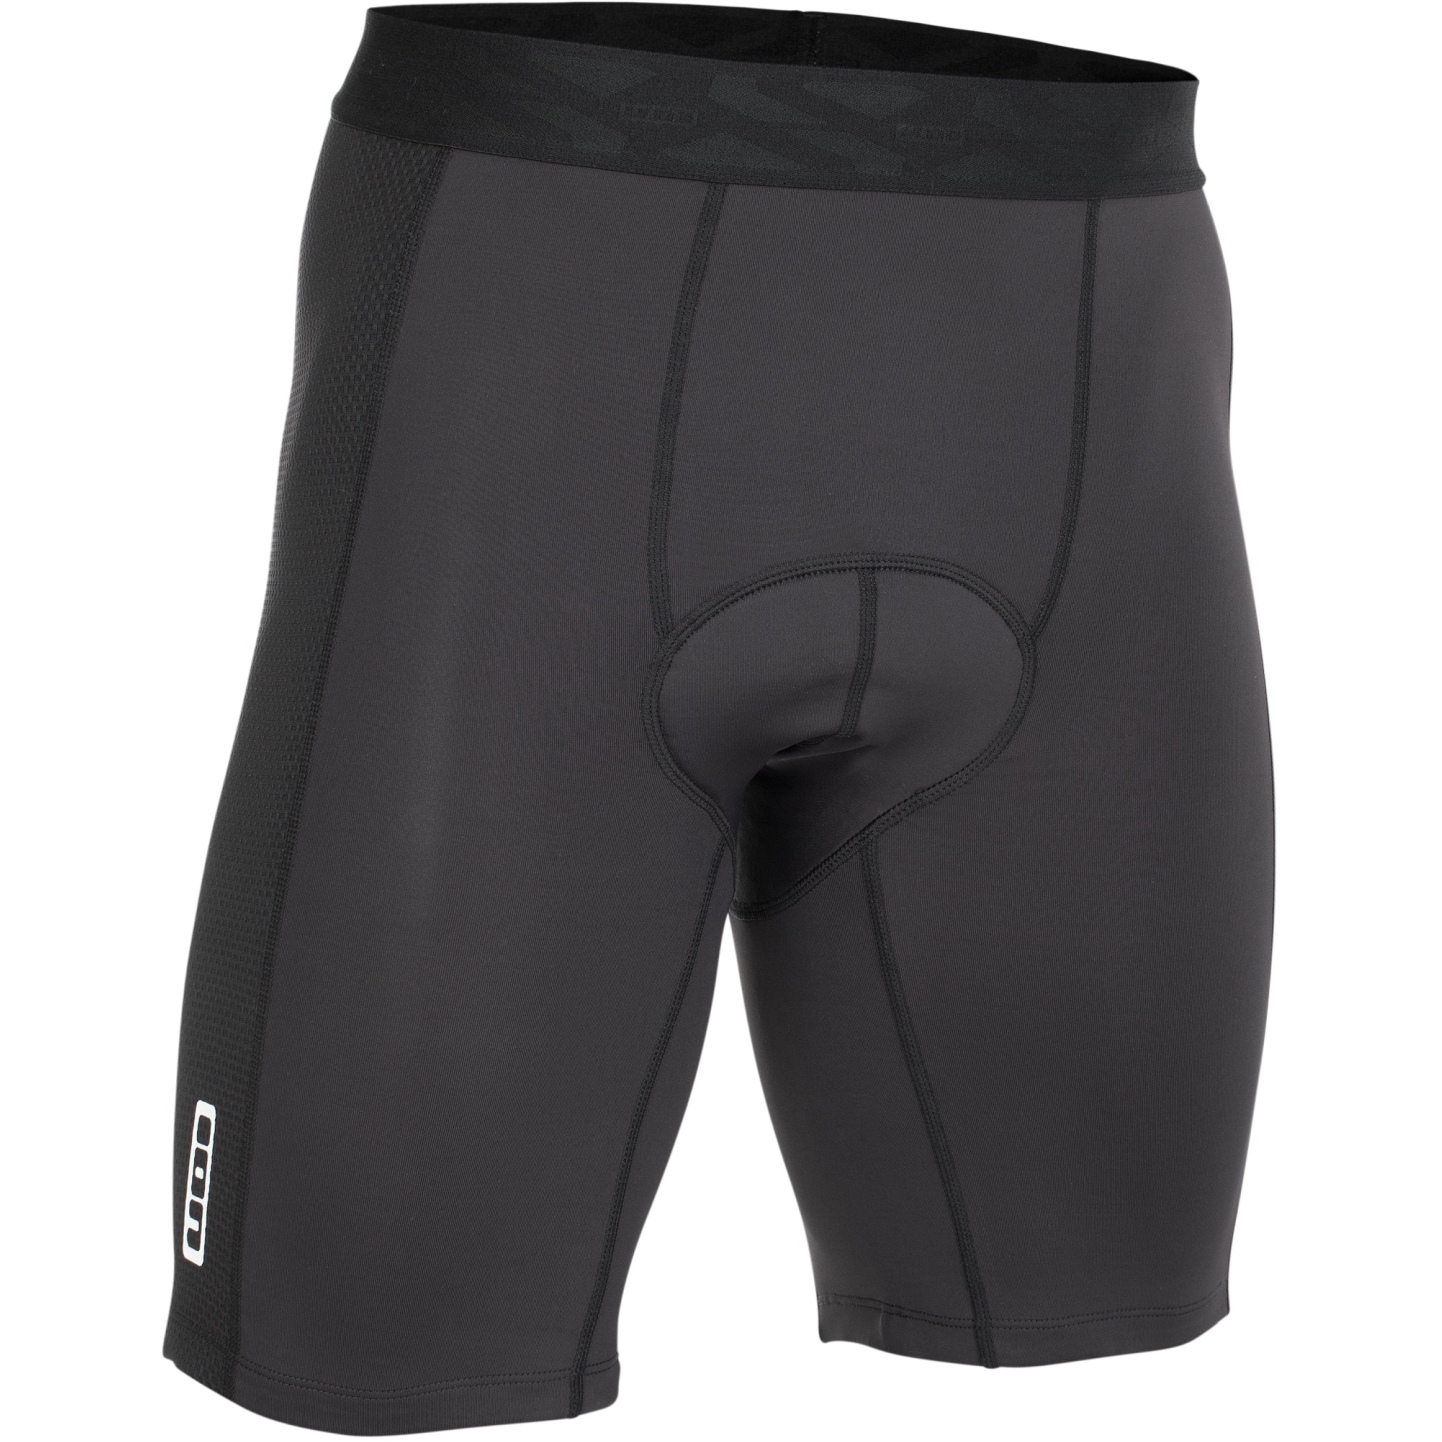 Image of ION Bike In-Shorts Long with Seat Pad Women - Black